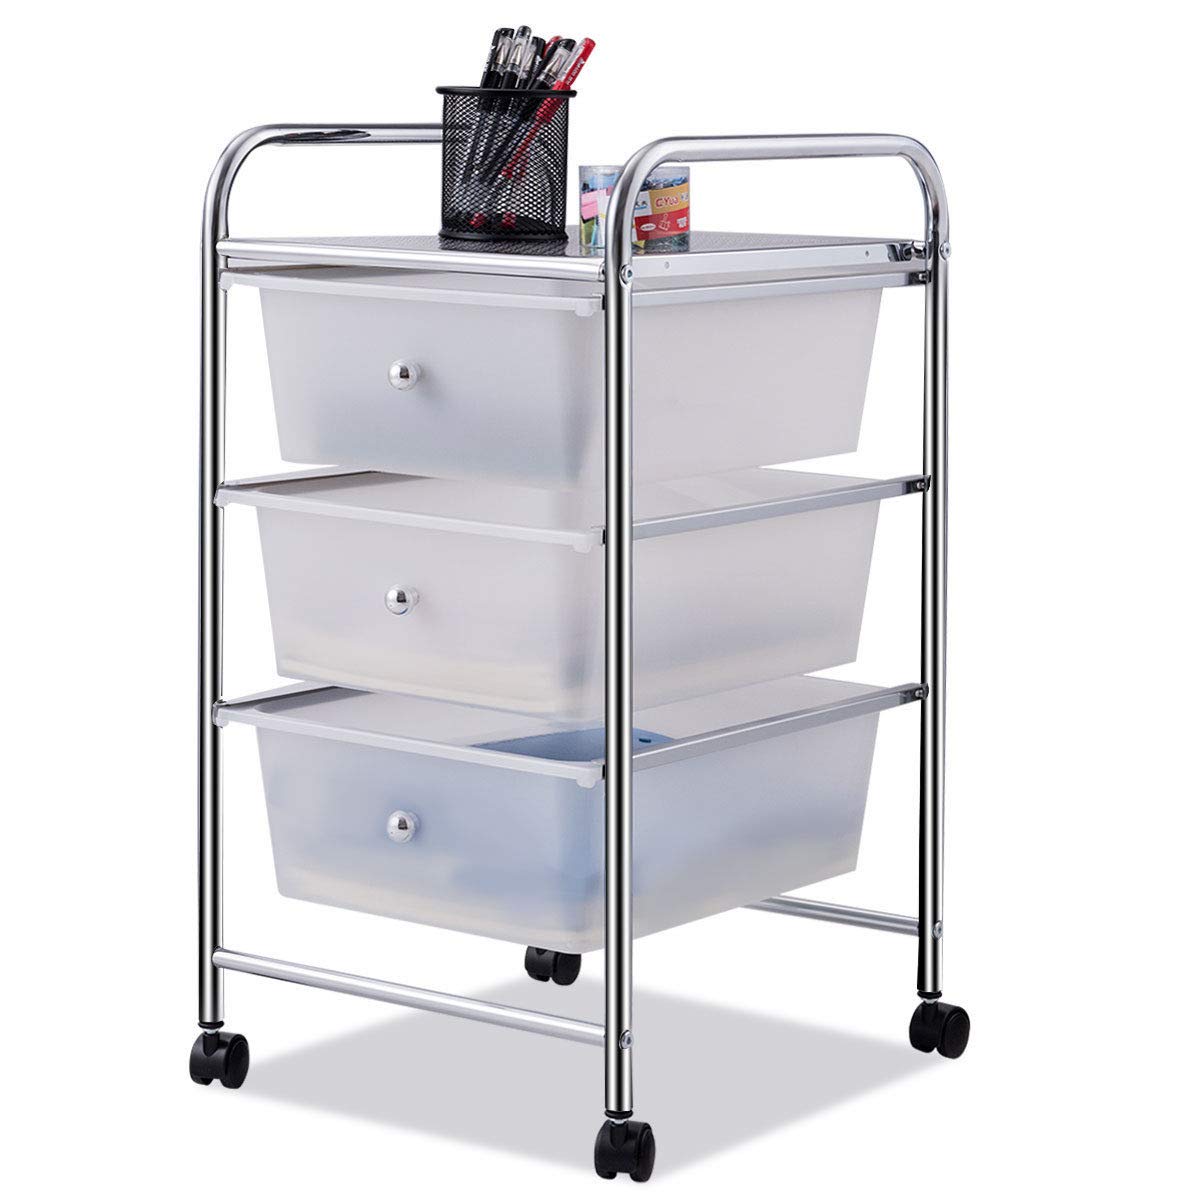 Giantex Rolling Cart with Drawers, Craft Organizer with Wheels, 3 Drawer Storage Container Bins